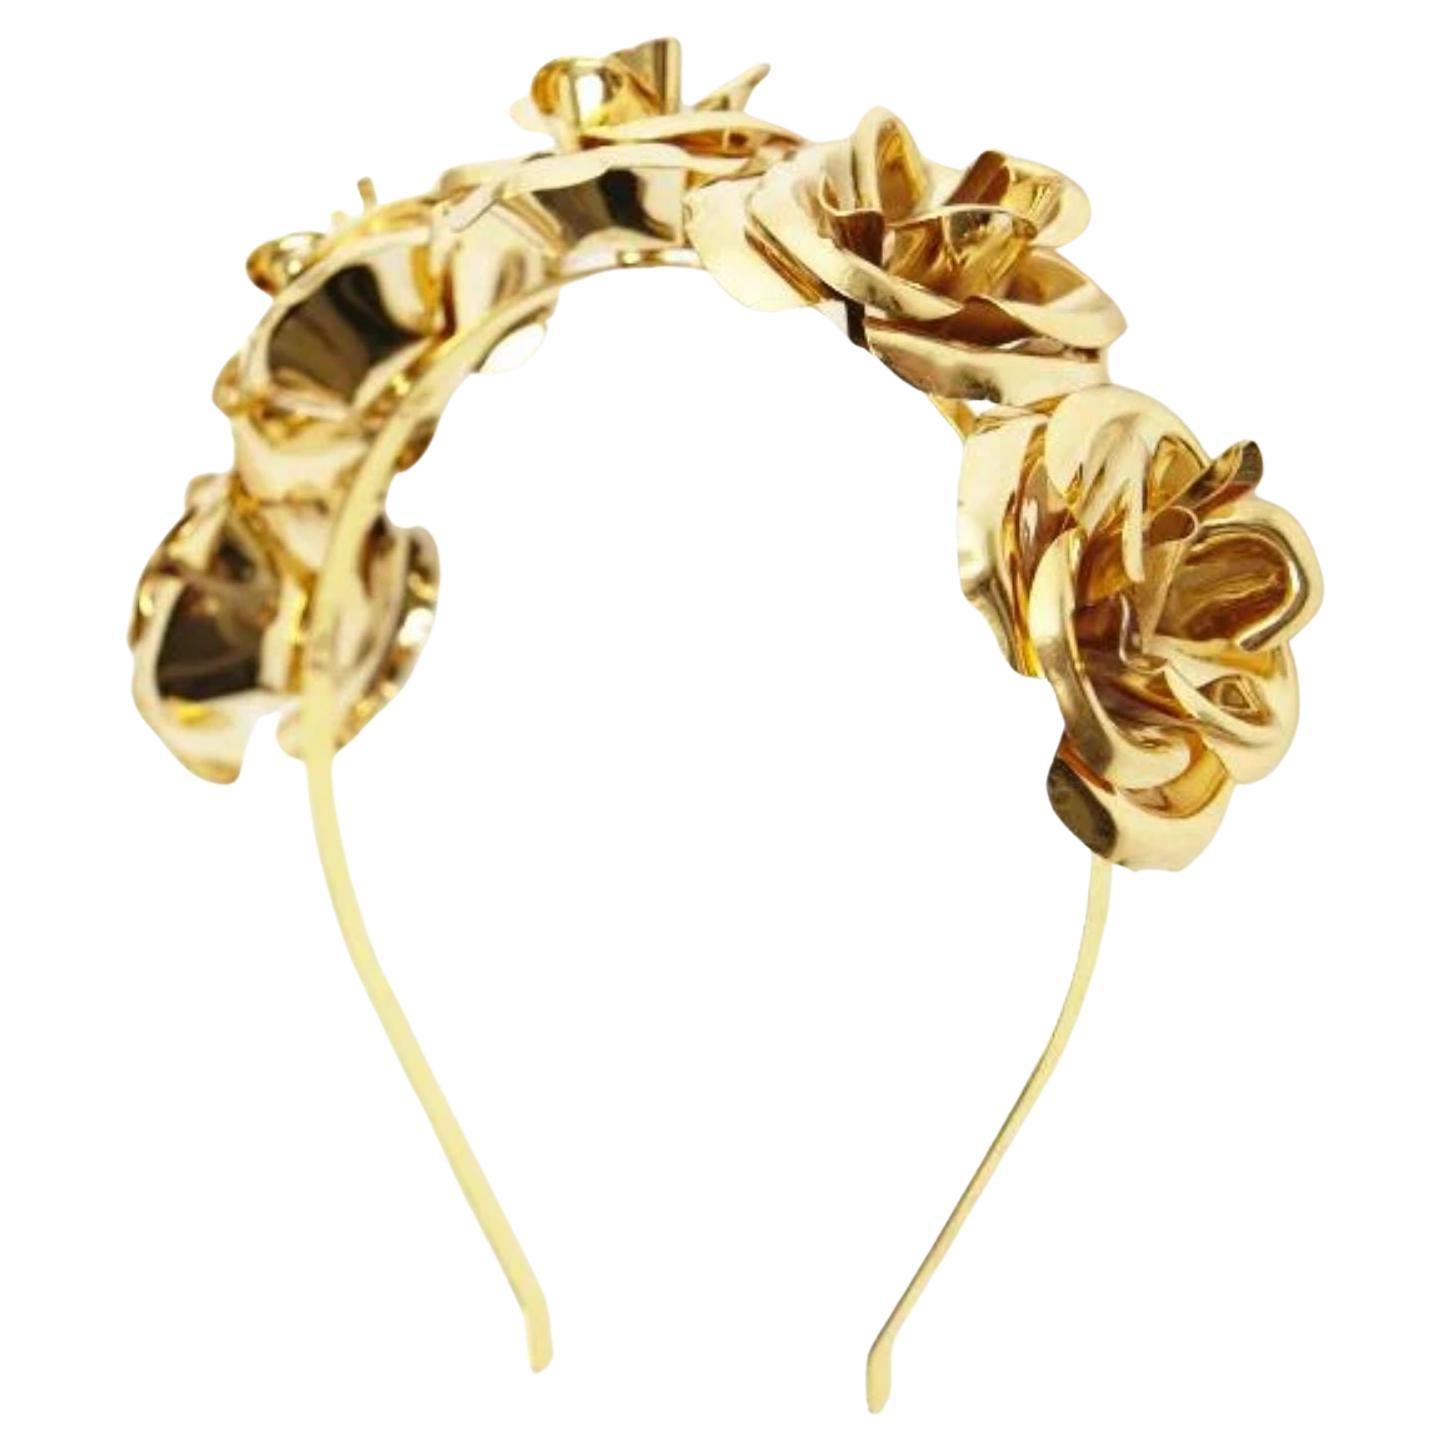 A modern industrial take on a classic, this Mordekai headband is unlike anything in the market! A special process dedicated mostly for furniture called powder coating was used to coat the brass roses in baby pink. Worn famously by Erika Jayne for